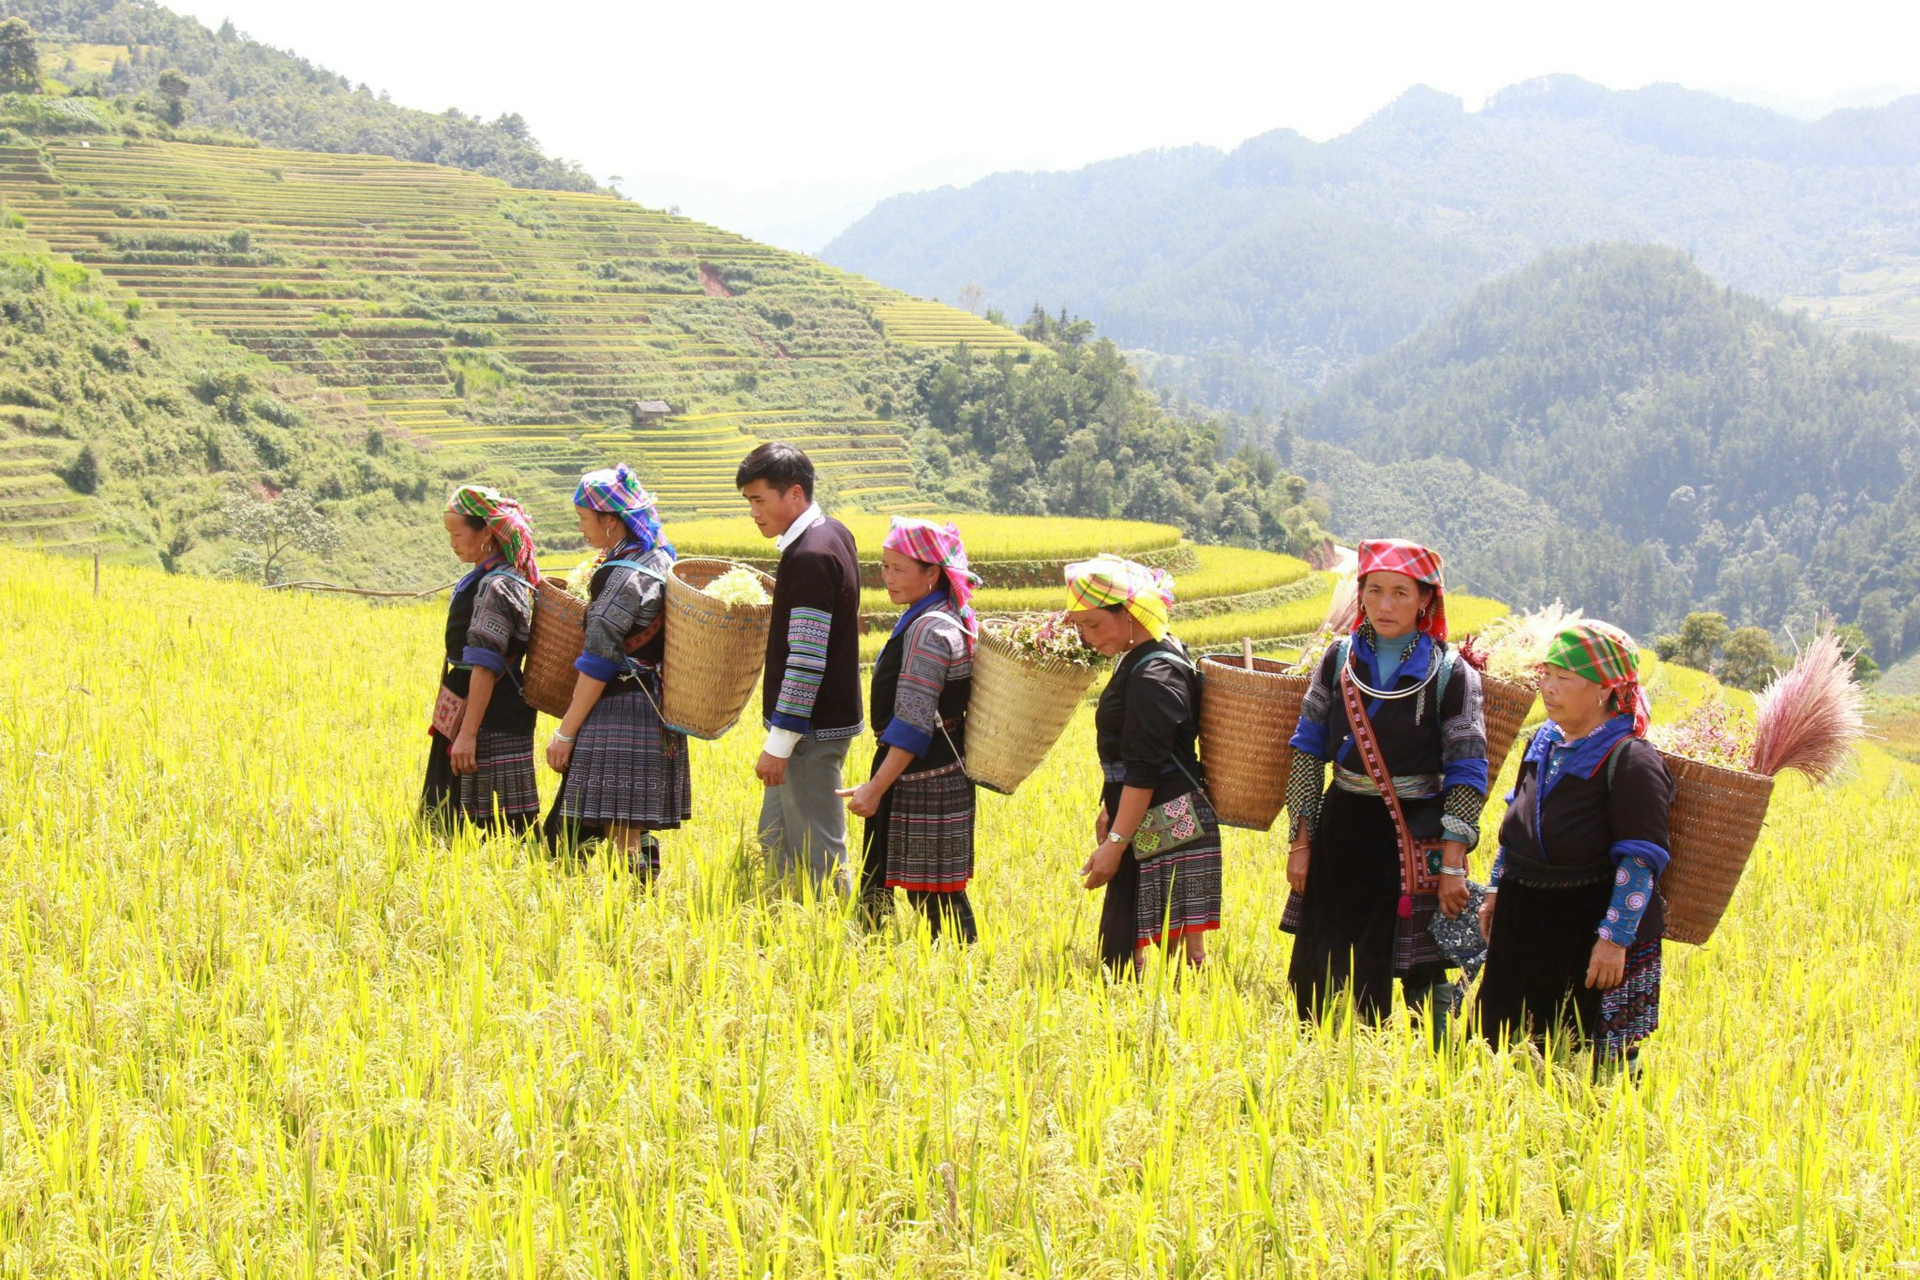 Besides a national symbol, the terraced rice fields represent Mong people's cultural identity. Photo: Thanh Tien.